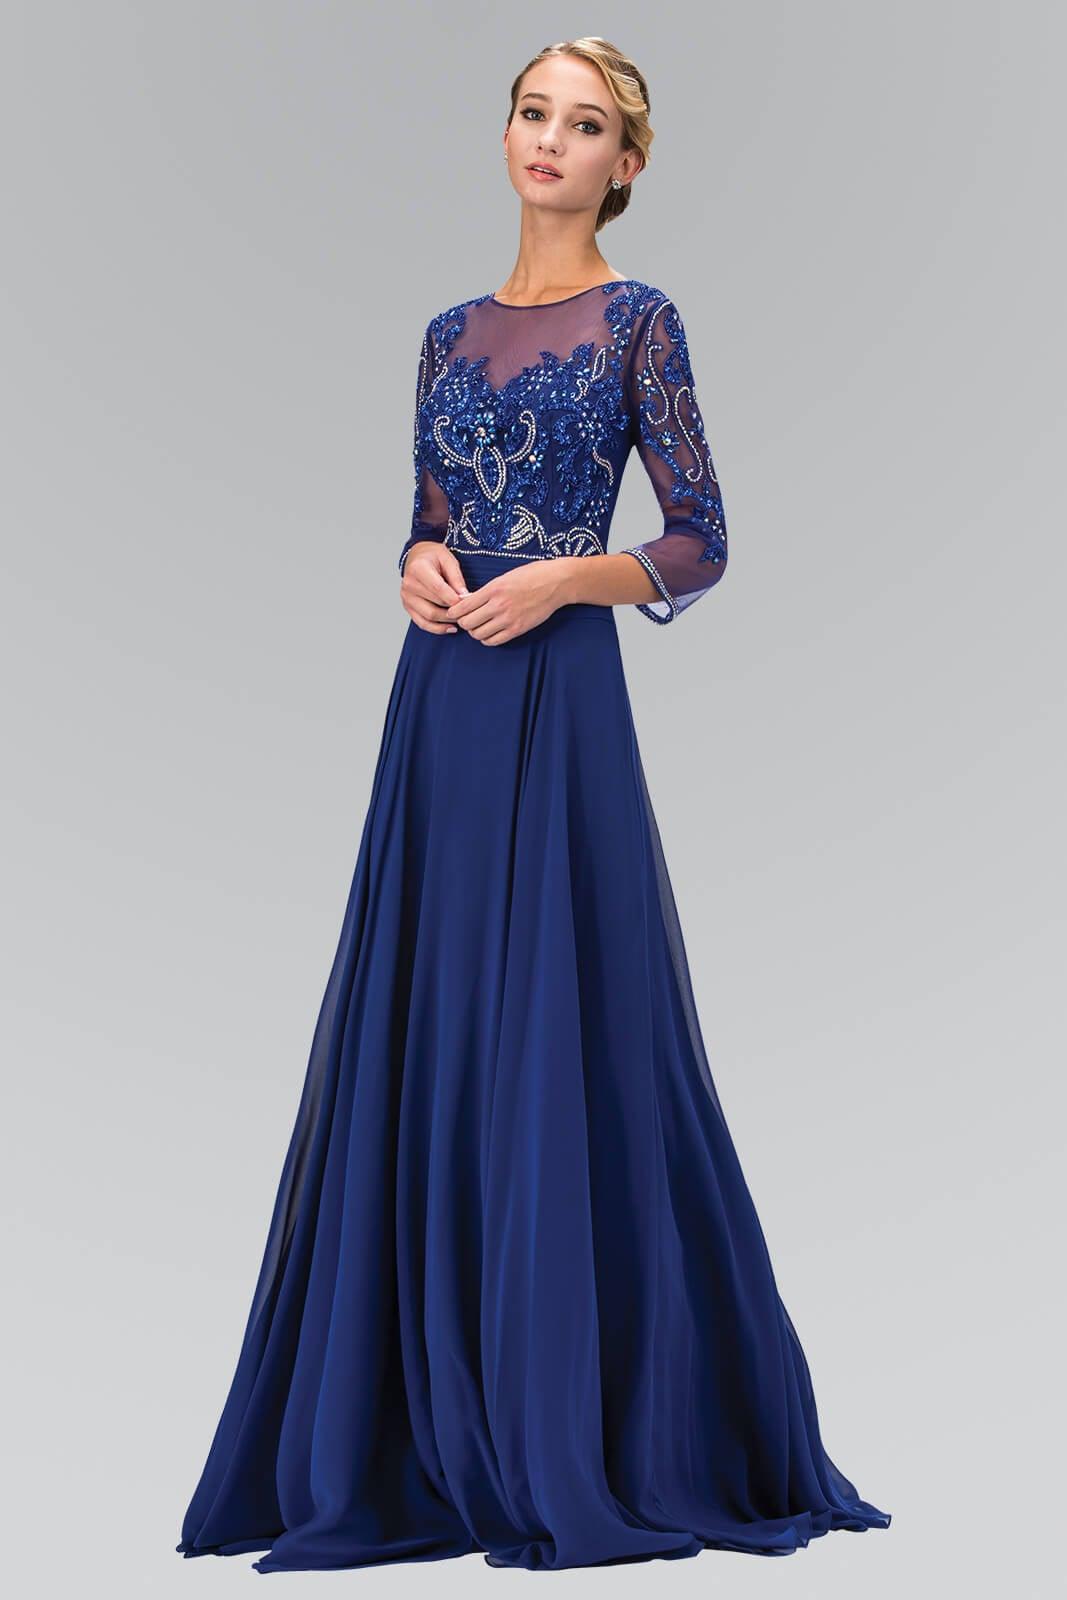 Royal Formal Chiffon Long Dress for $204.99 – The Dress Outlet